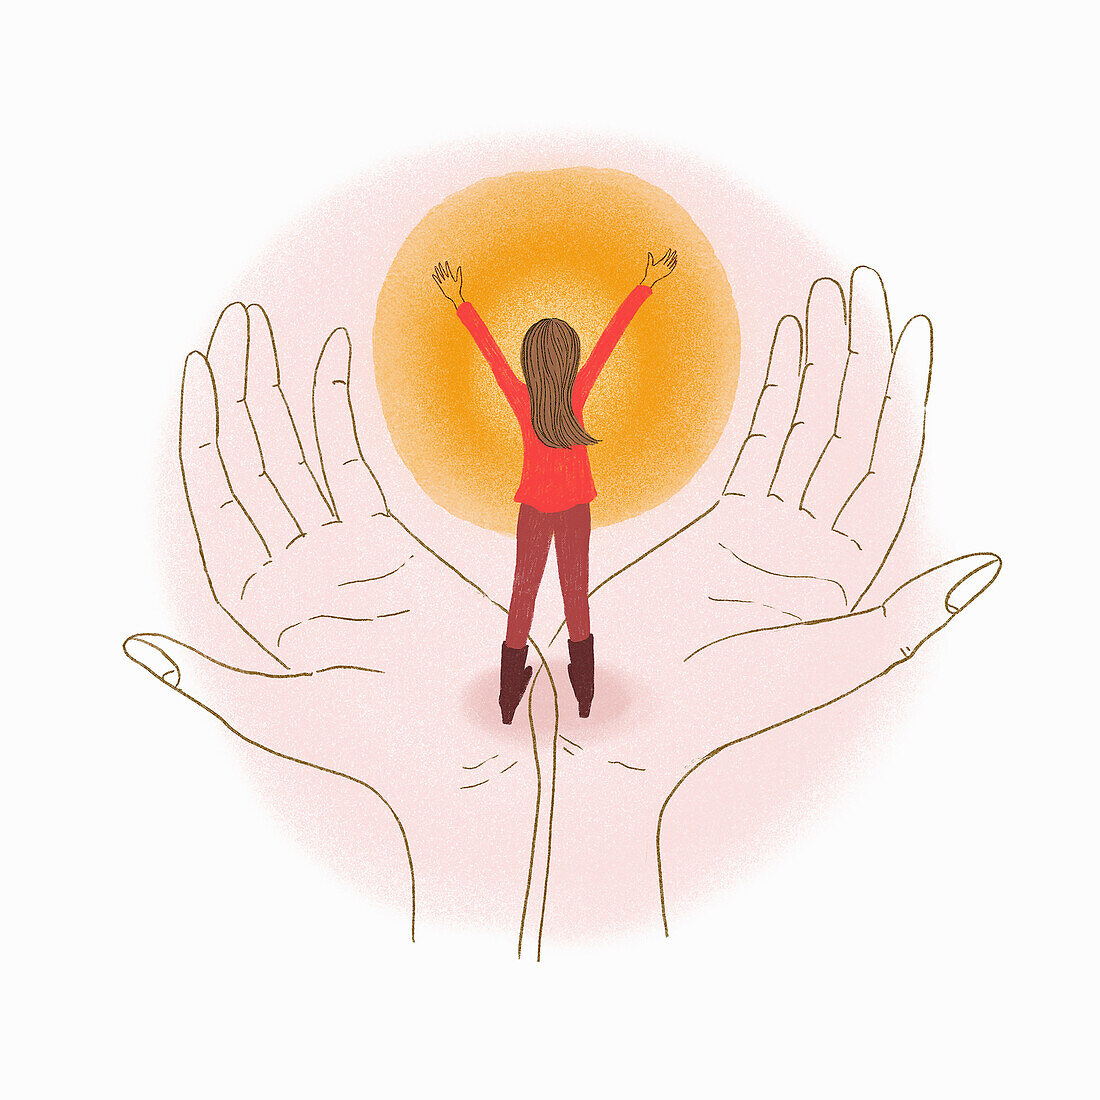 Confident teenager supported by helping hands, illustration